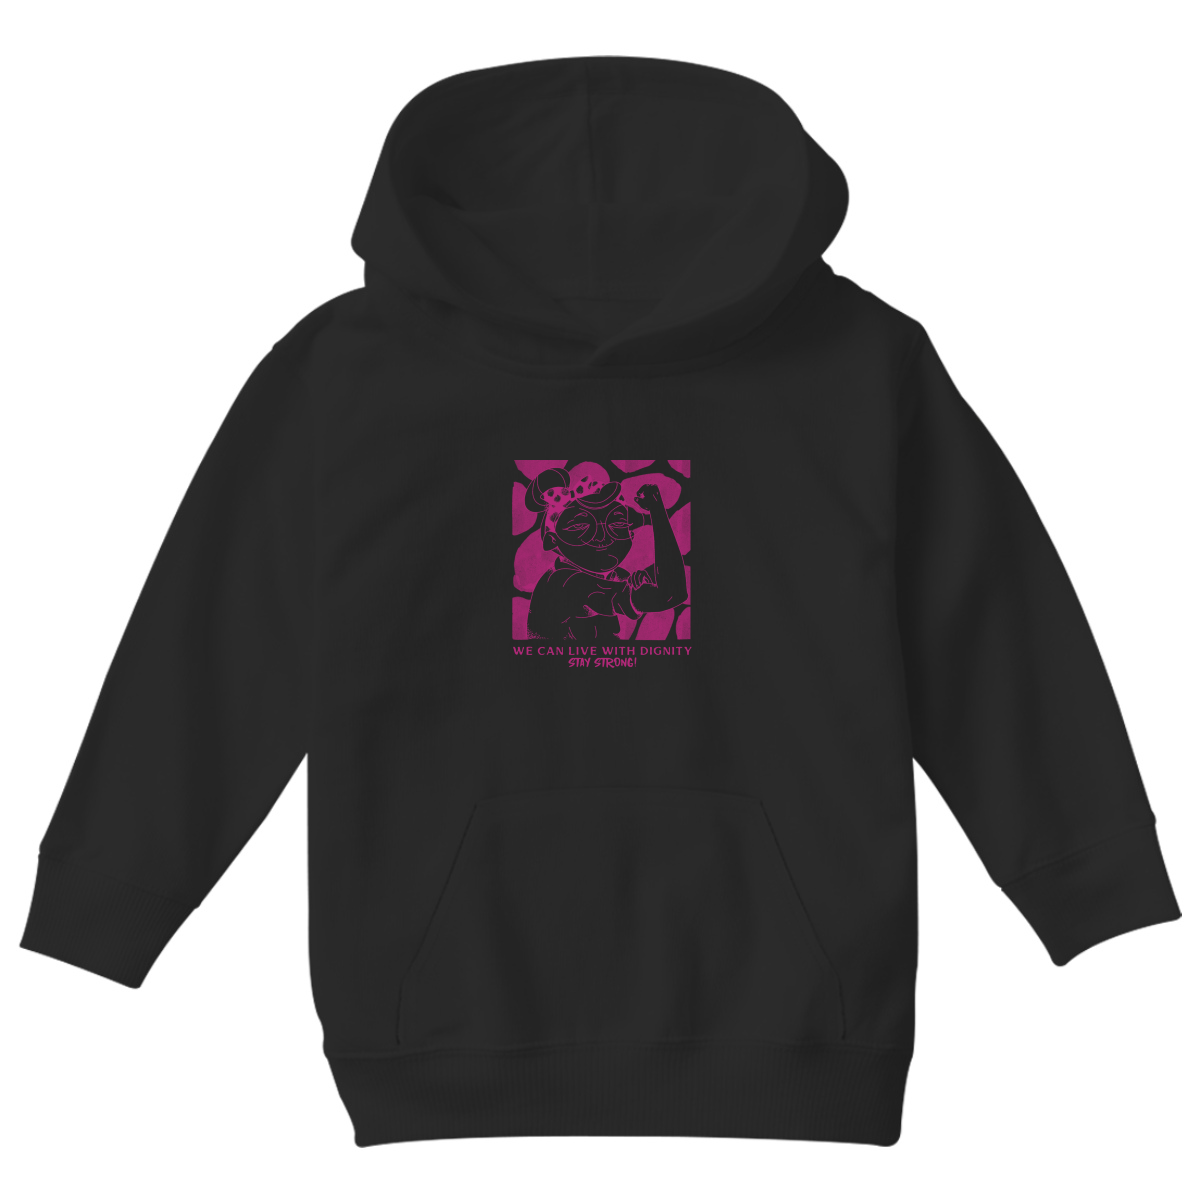 We can live with dignity STAY STRONG! Kids Hoodie | Black